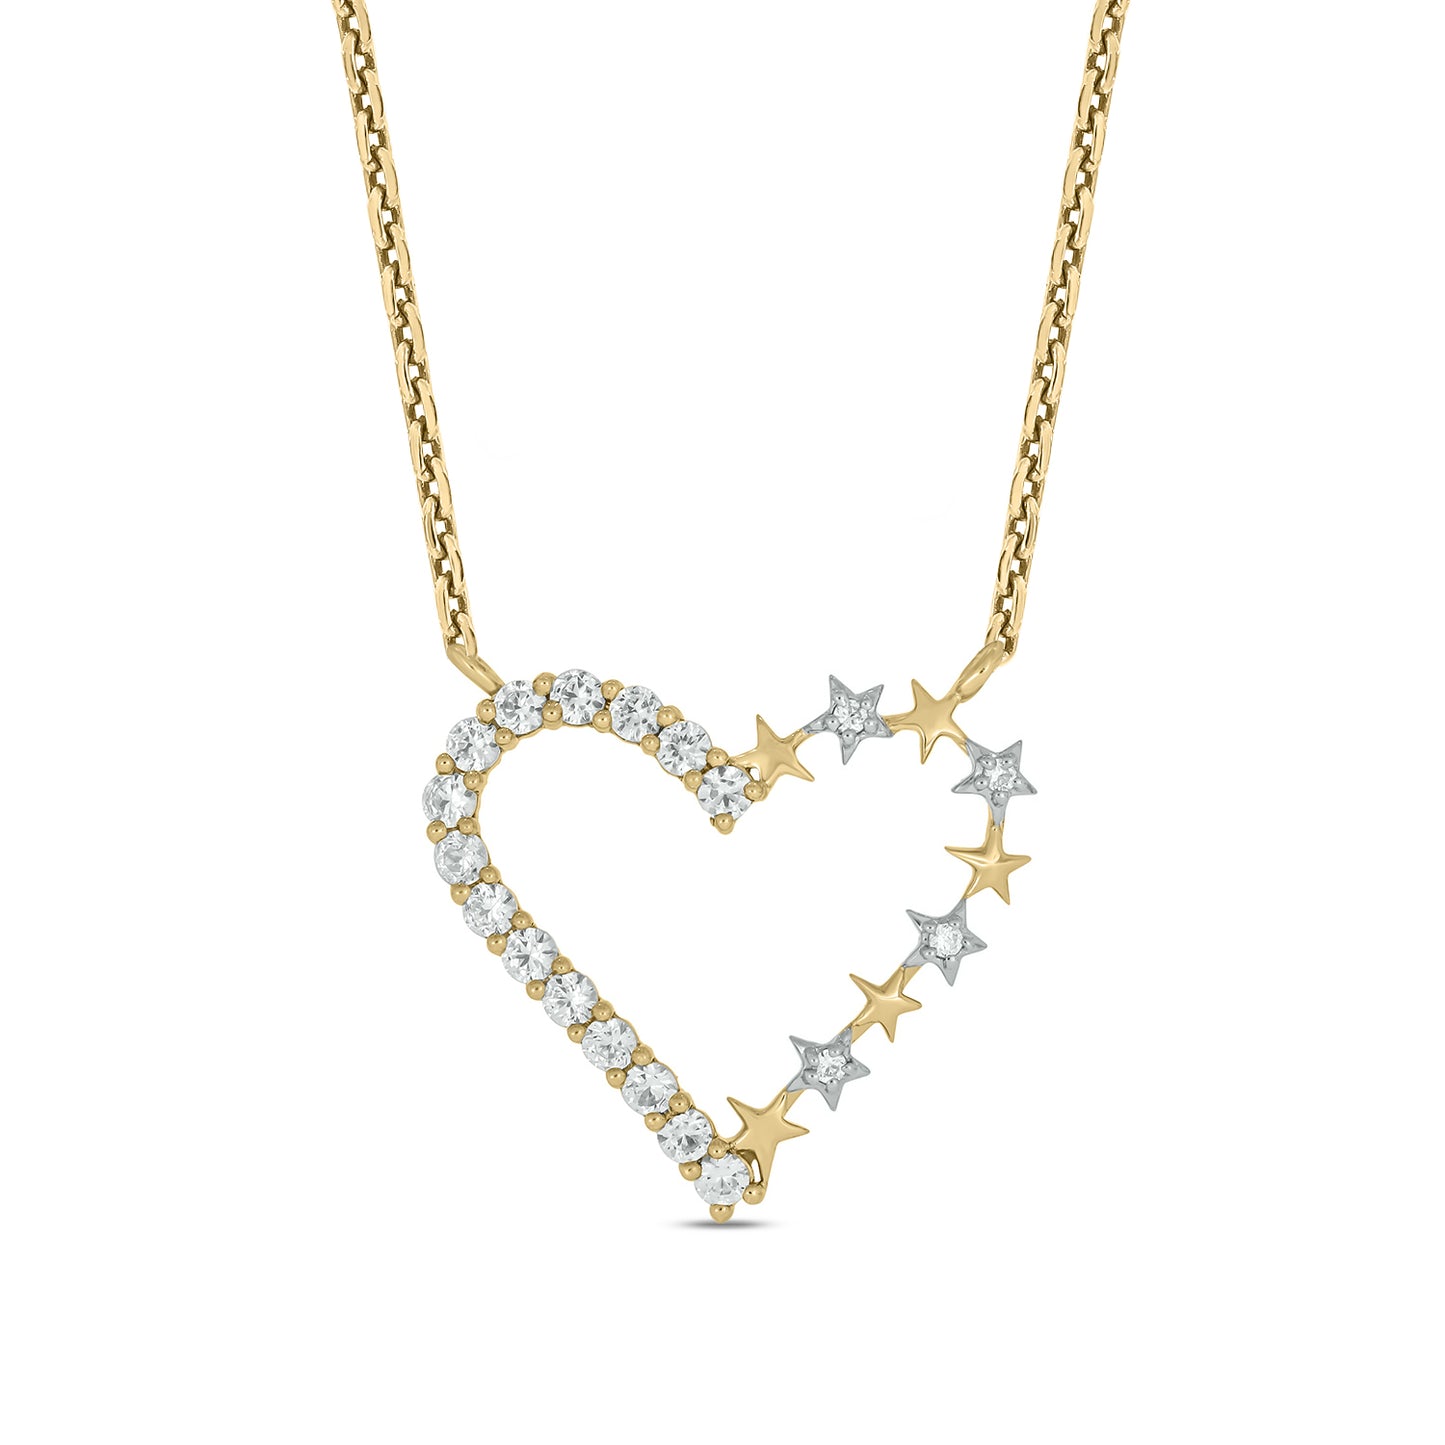 Unique Star Studded Heart Diamond Necklace in 925 Sterling Silver